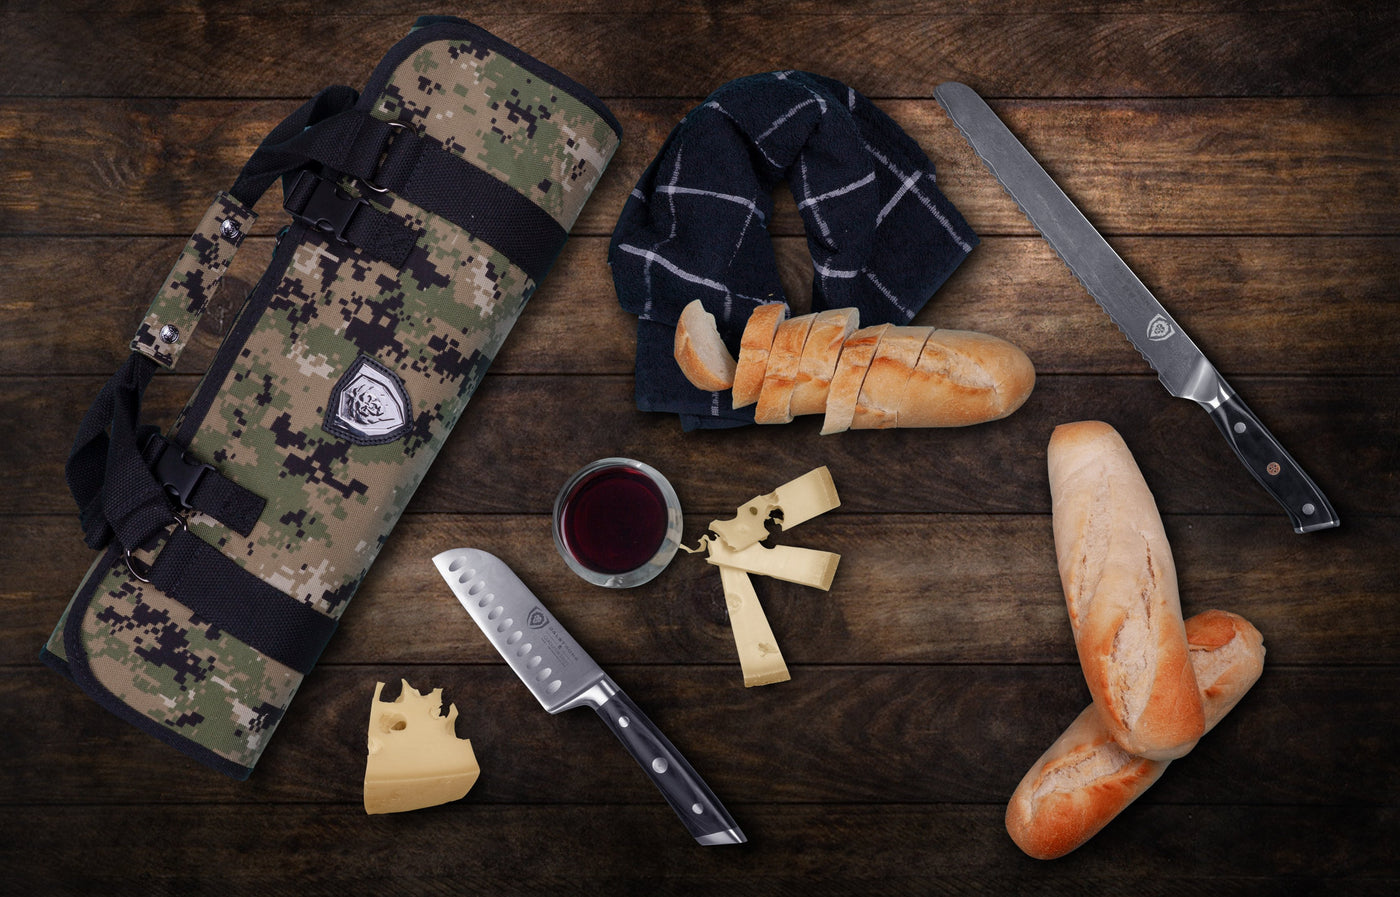 Premium Knife Roll | Camouflage | Ballistic Series | Dalstrong ©